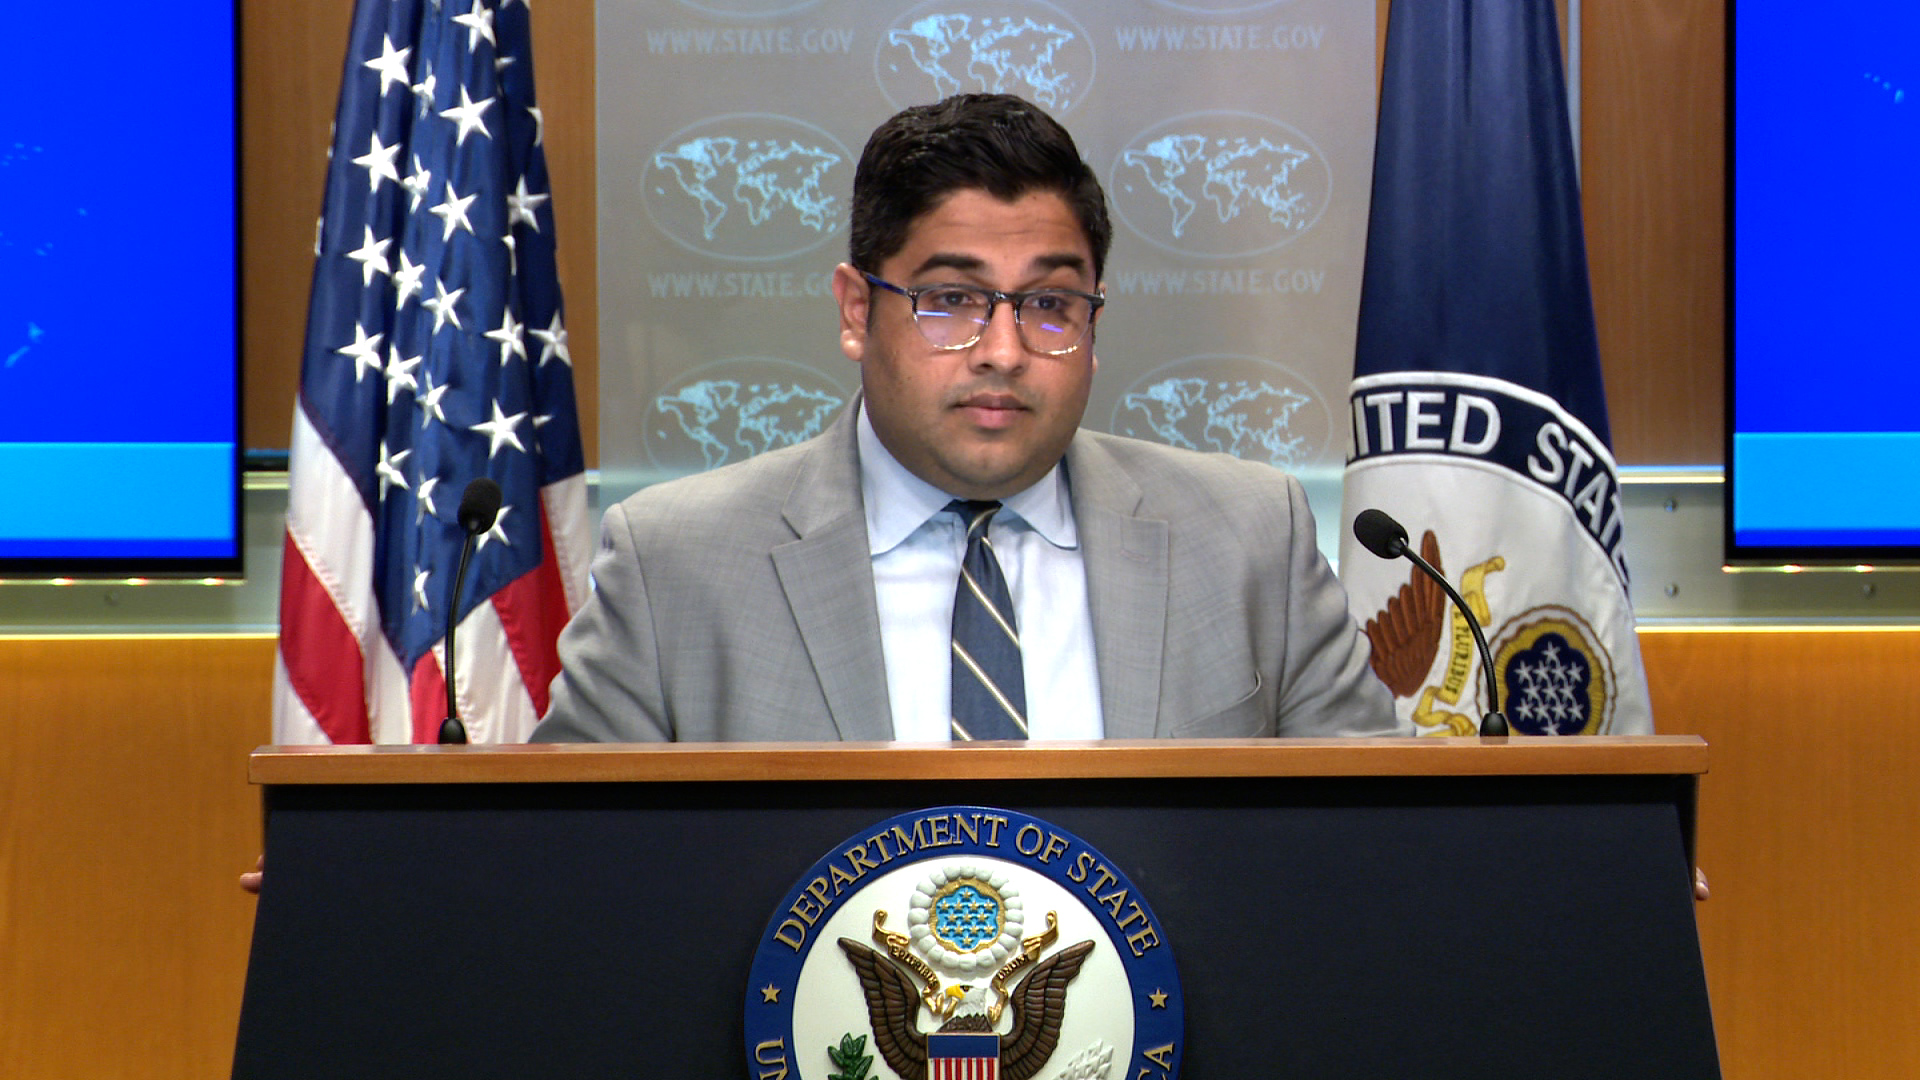 US State Department deputy spokesperson Vedant Patel speaks at a media briefing on Wednesday.